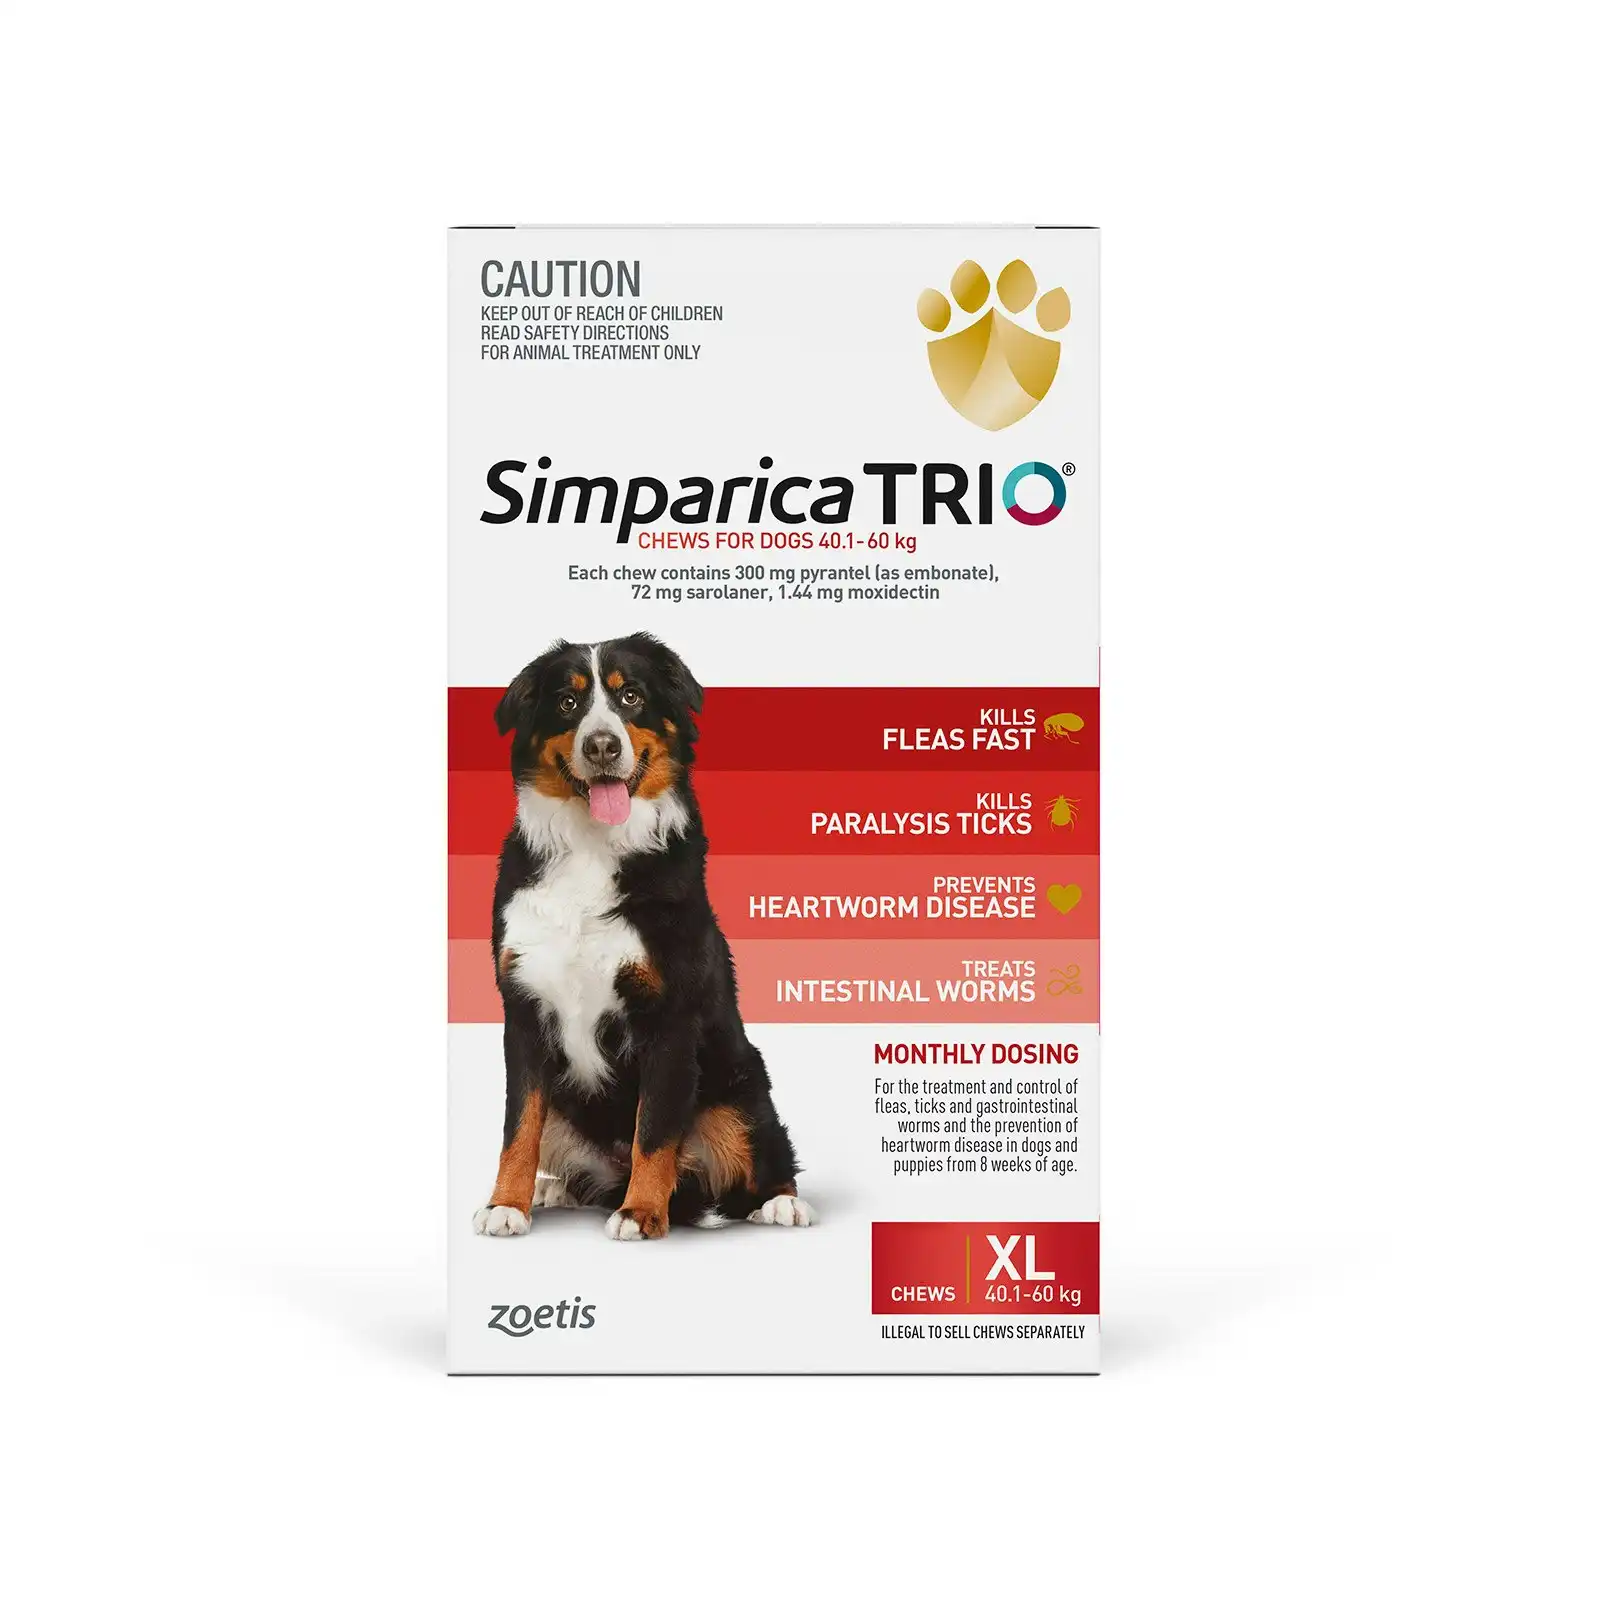 Simparica Trio for Extra Large Dogs 40.1 to 60 Kg (Red) 3 Chews